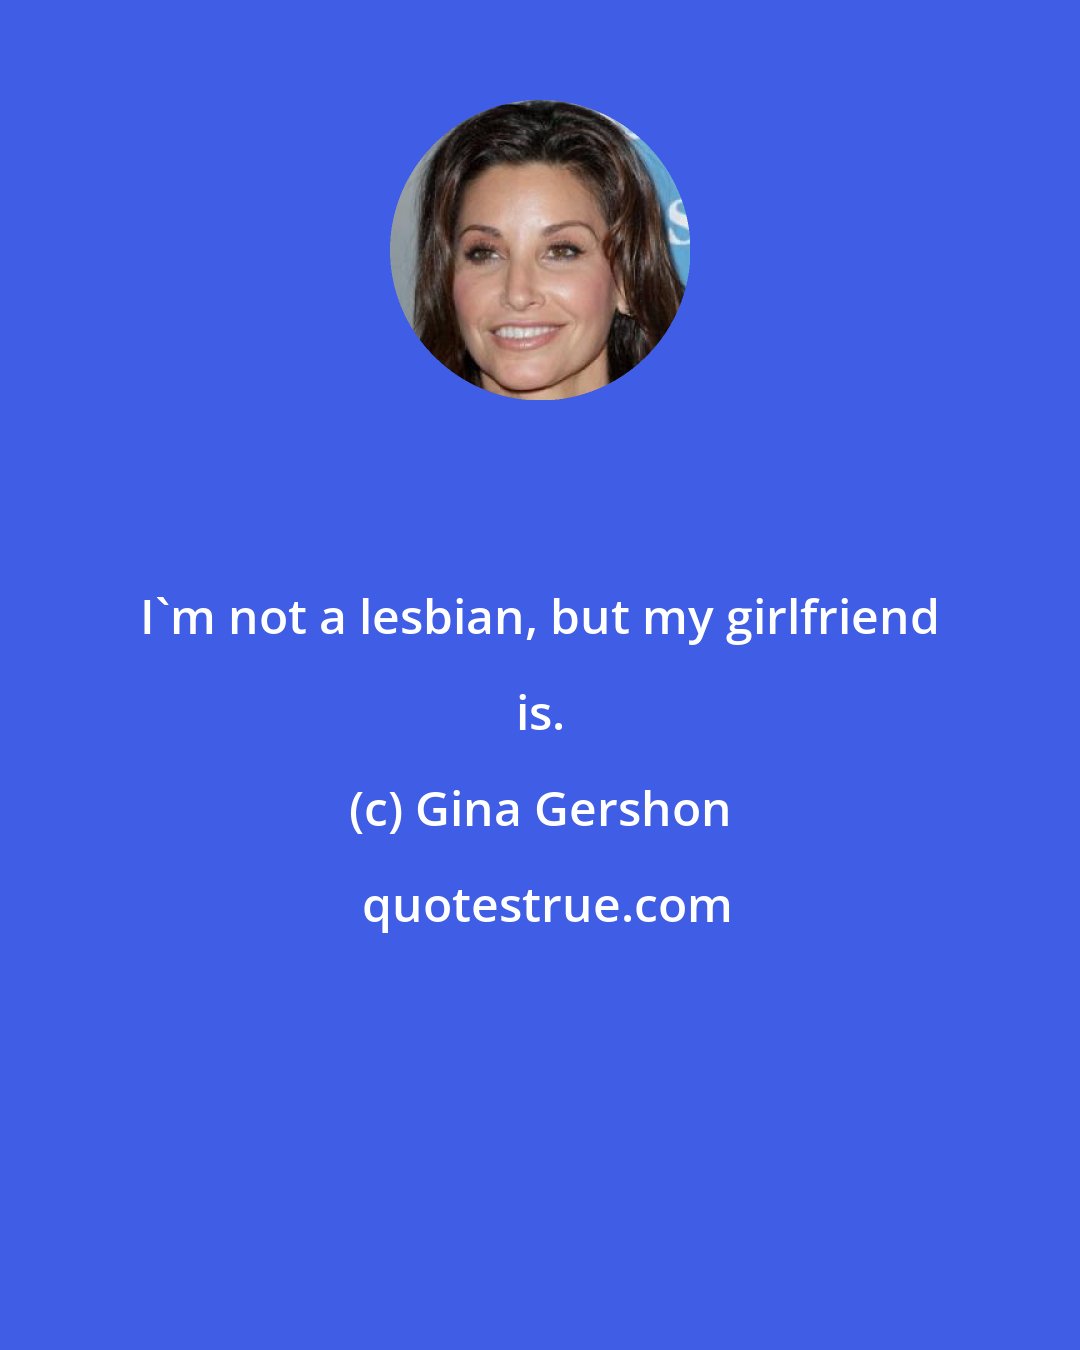 Gina Gershon: I'm not a lesbian, but my girlfriend is.